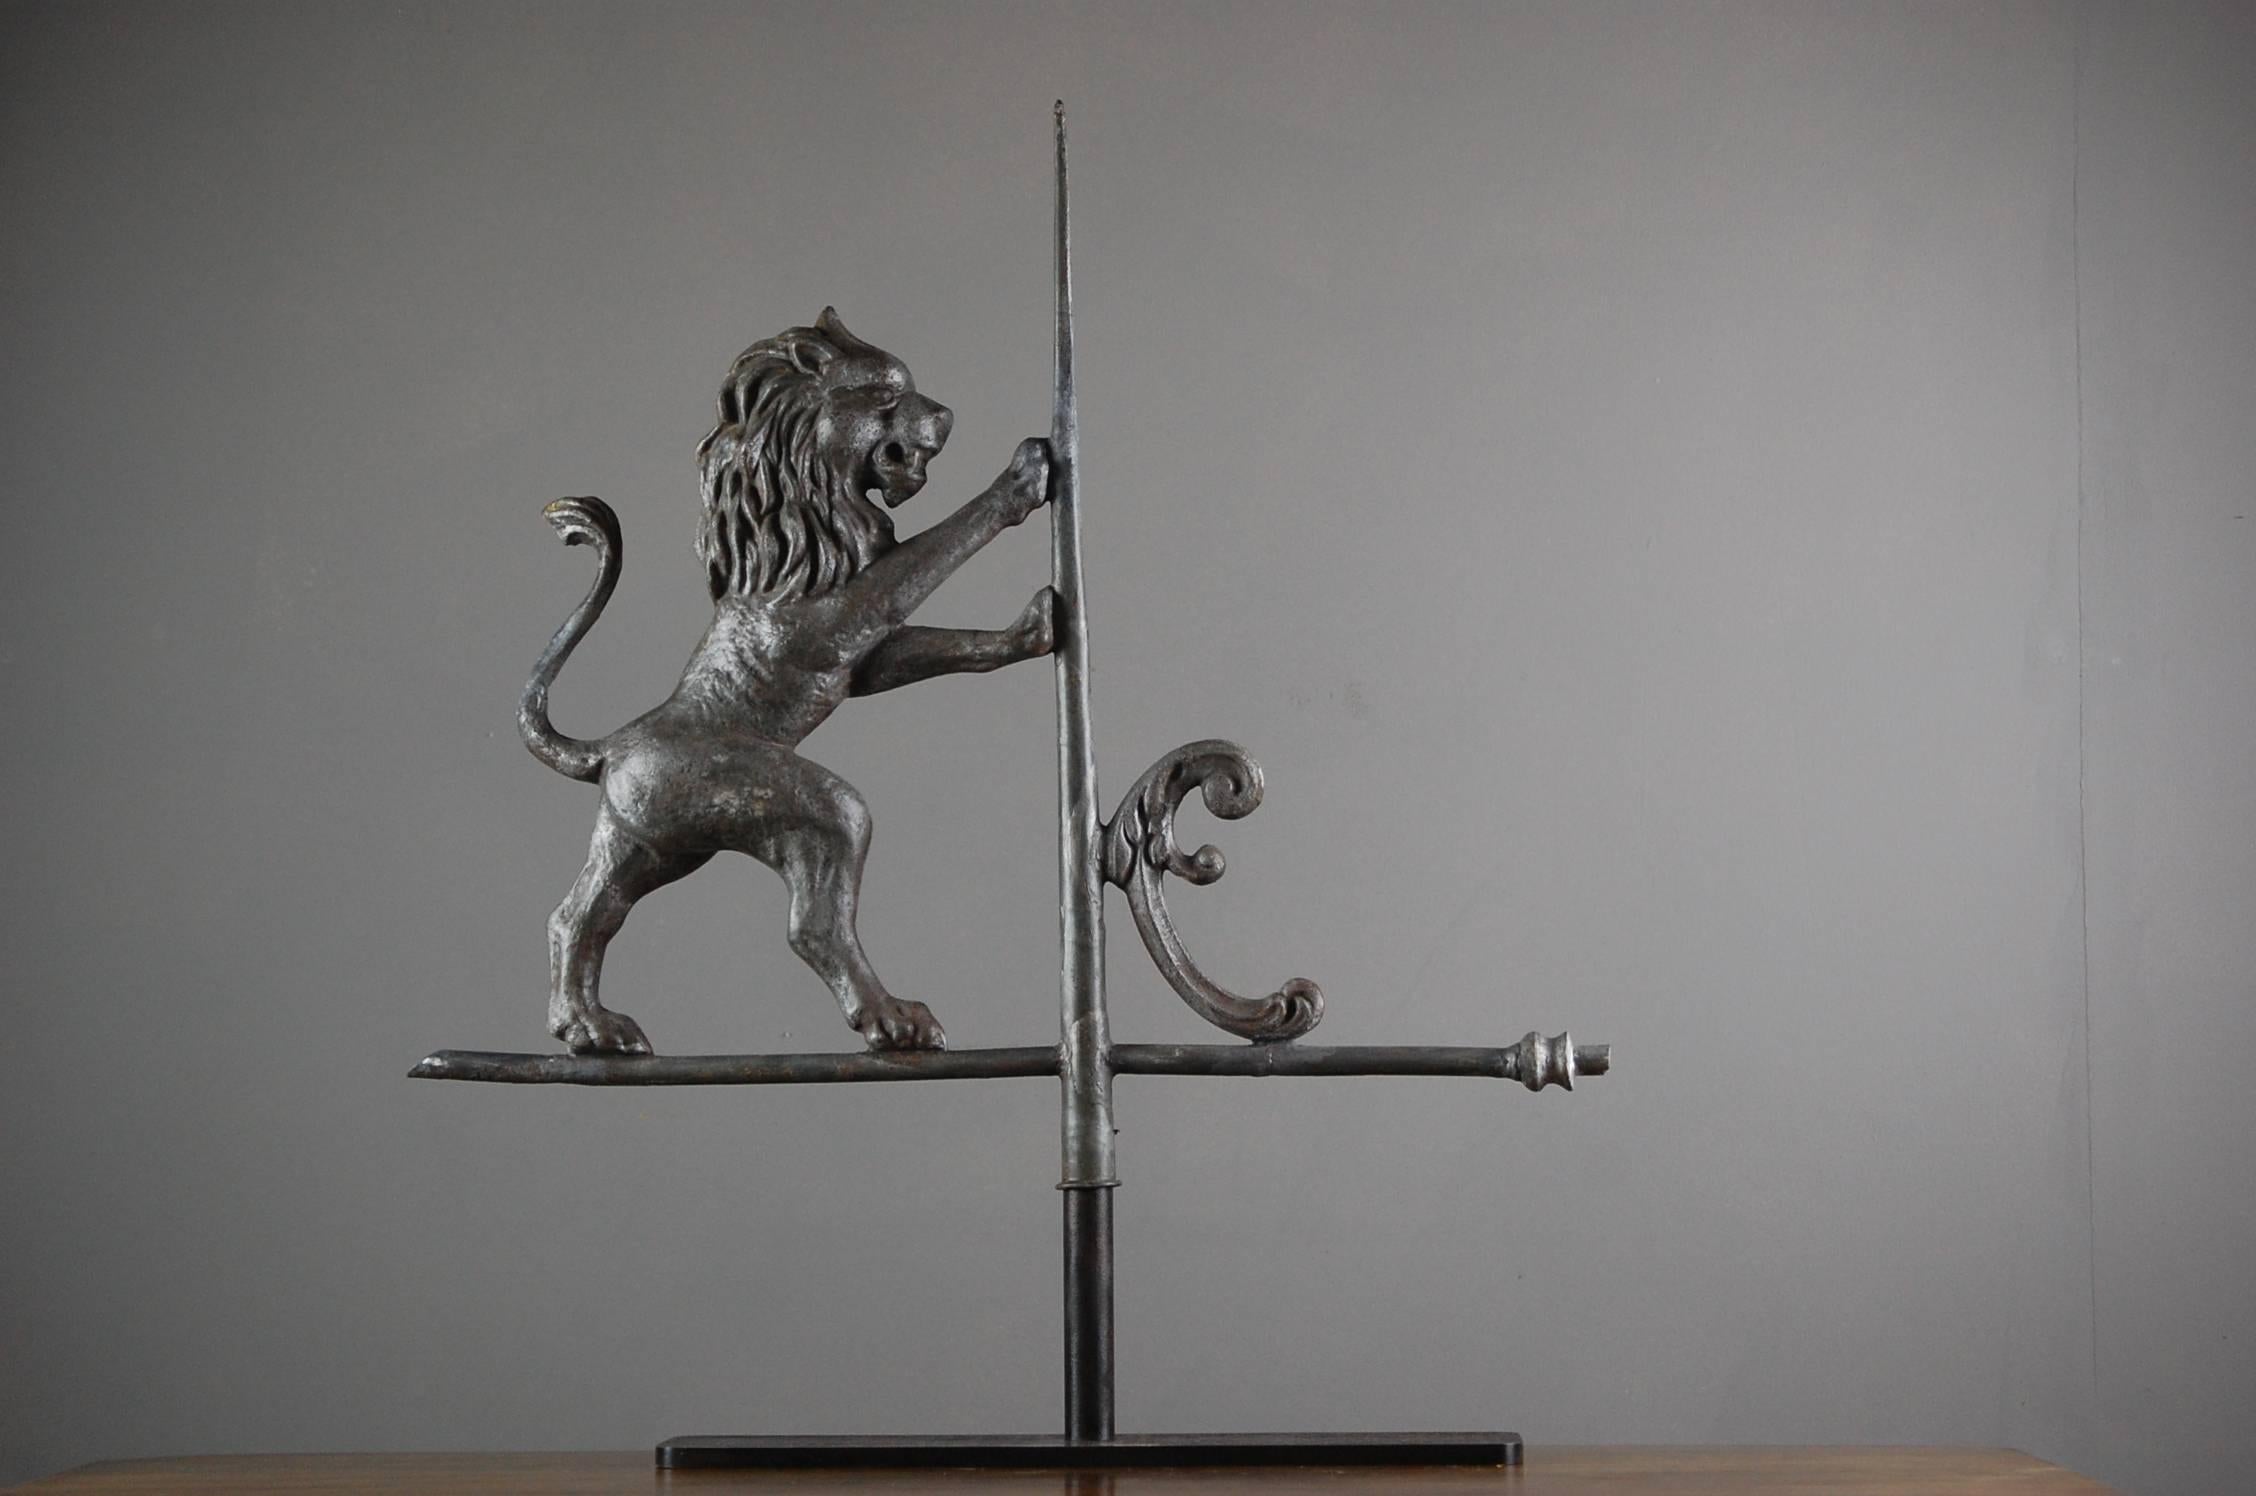 Full Bodied Lion Weathervane in zinc, retaining traces of original gilding, historic repairs but remarkable condition. Contemporary steel stand. Measurement Inc stand. France, circa 1890.